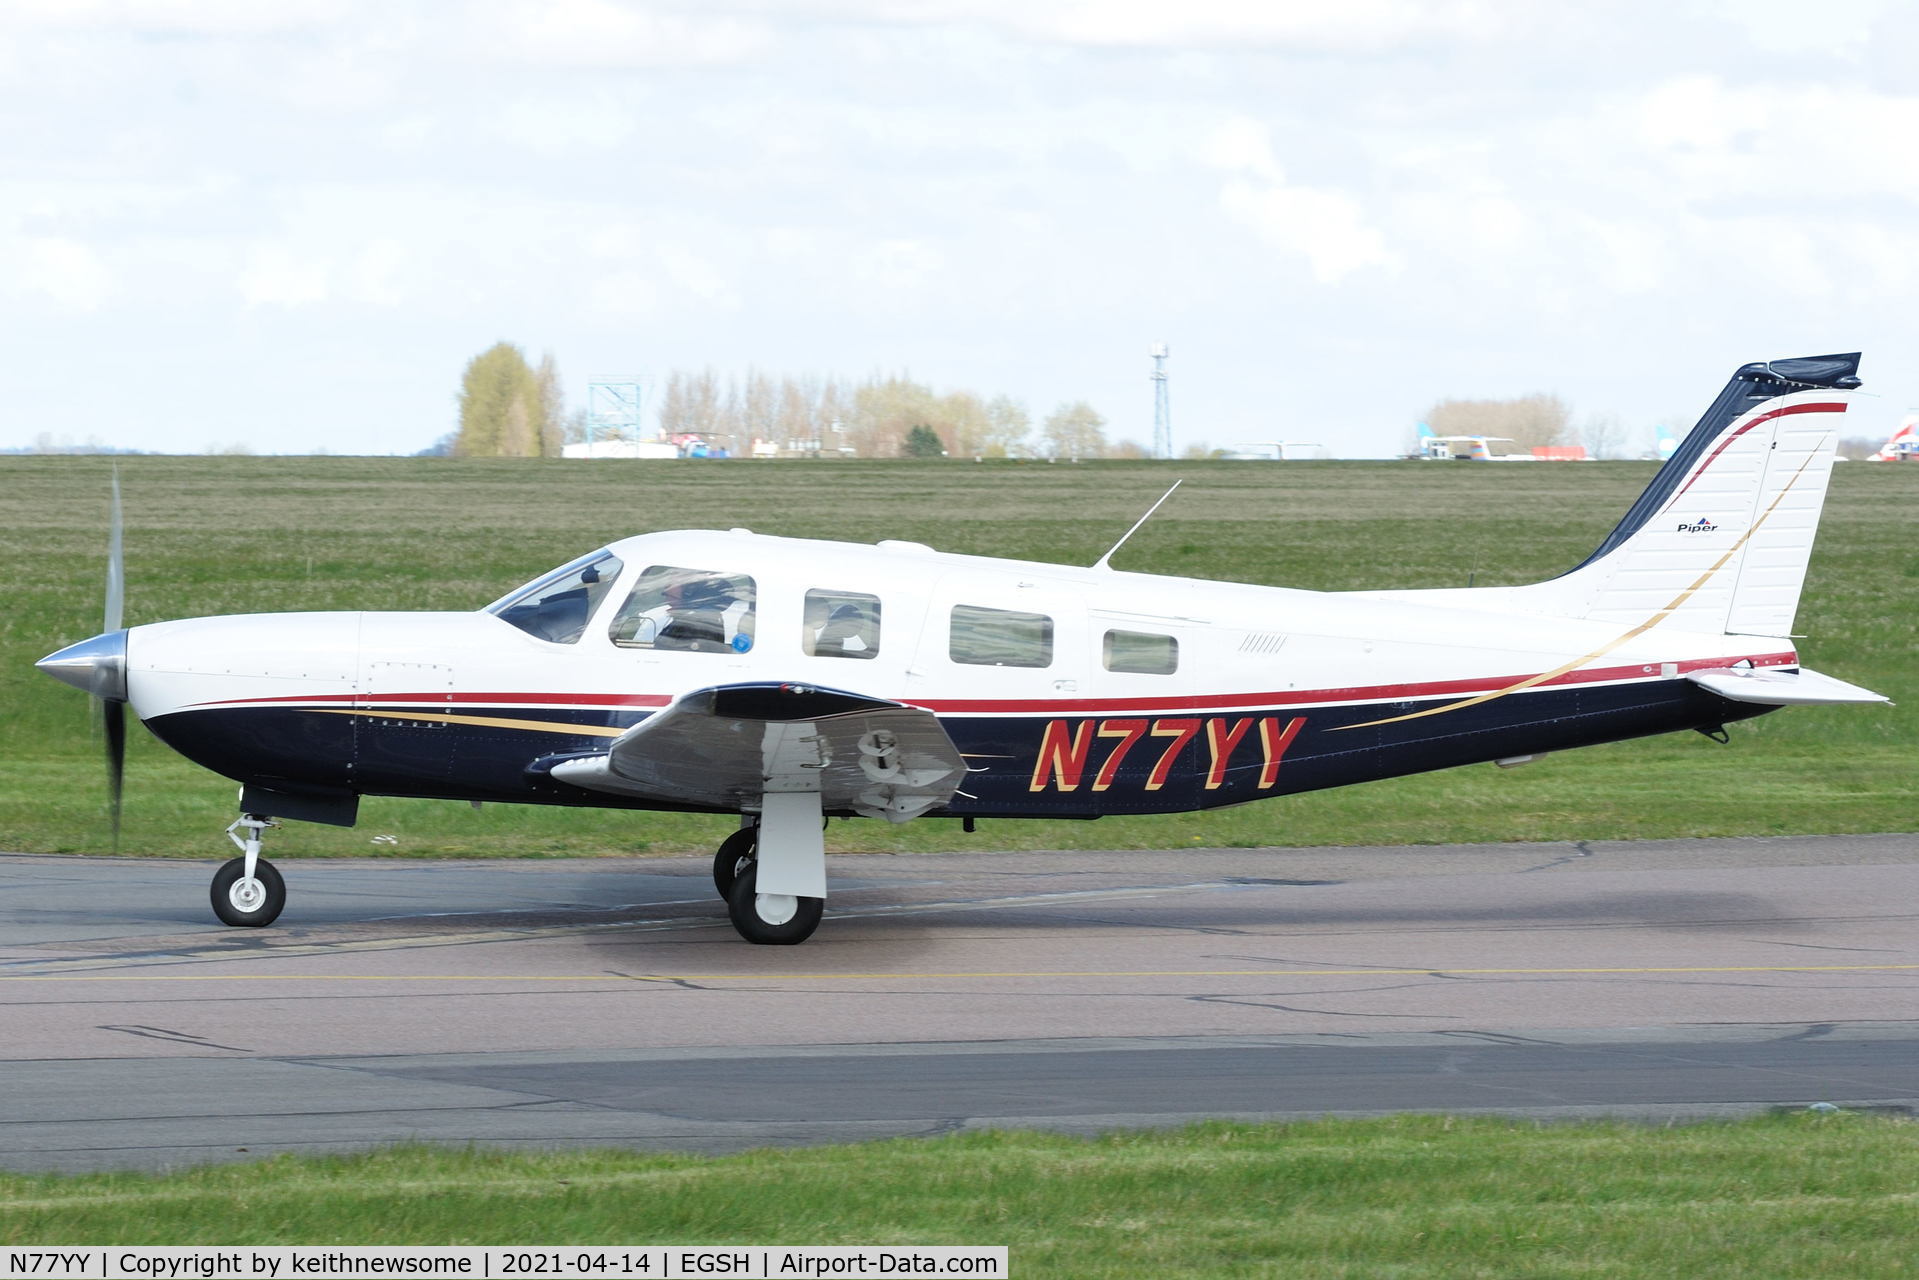 N77YY, 1999 Piper PA-32R-301T Turbo Saratoga C/N 3257120, Arriving at Norwich.